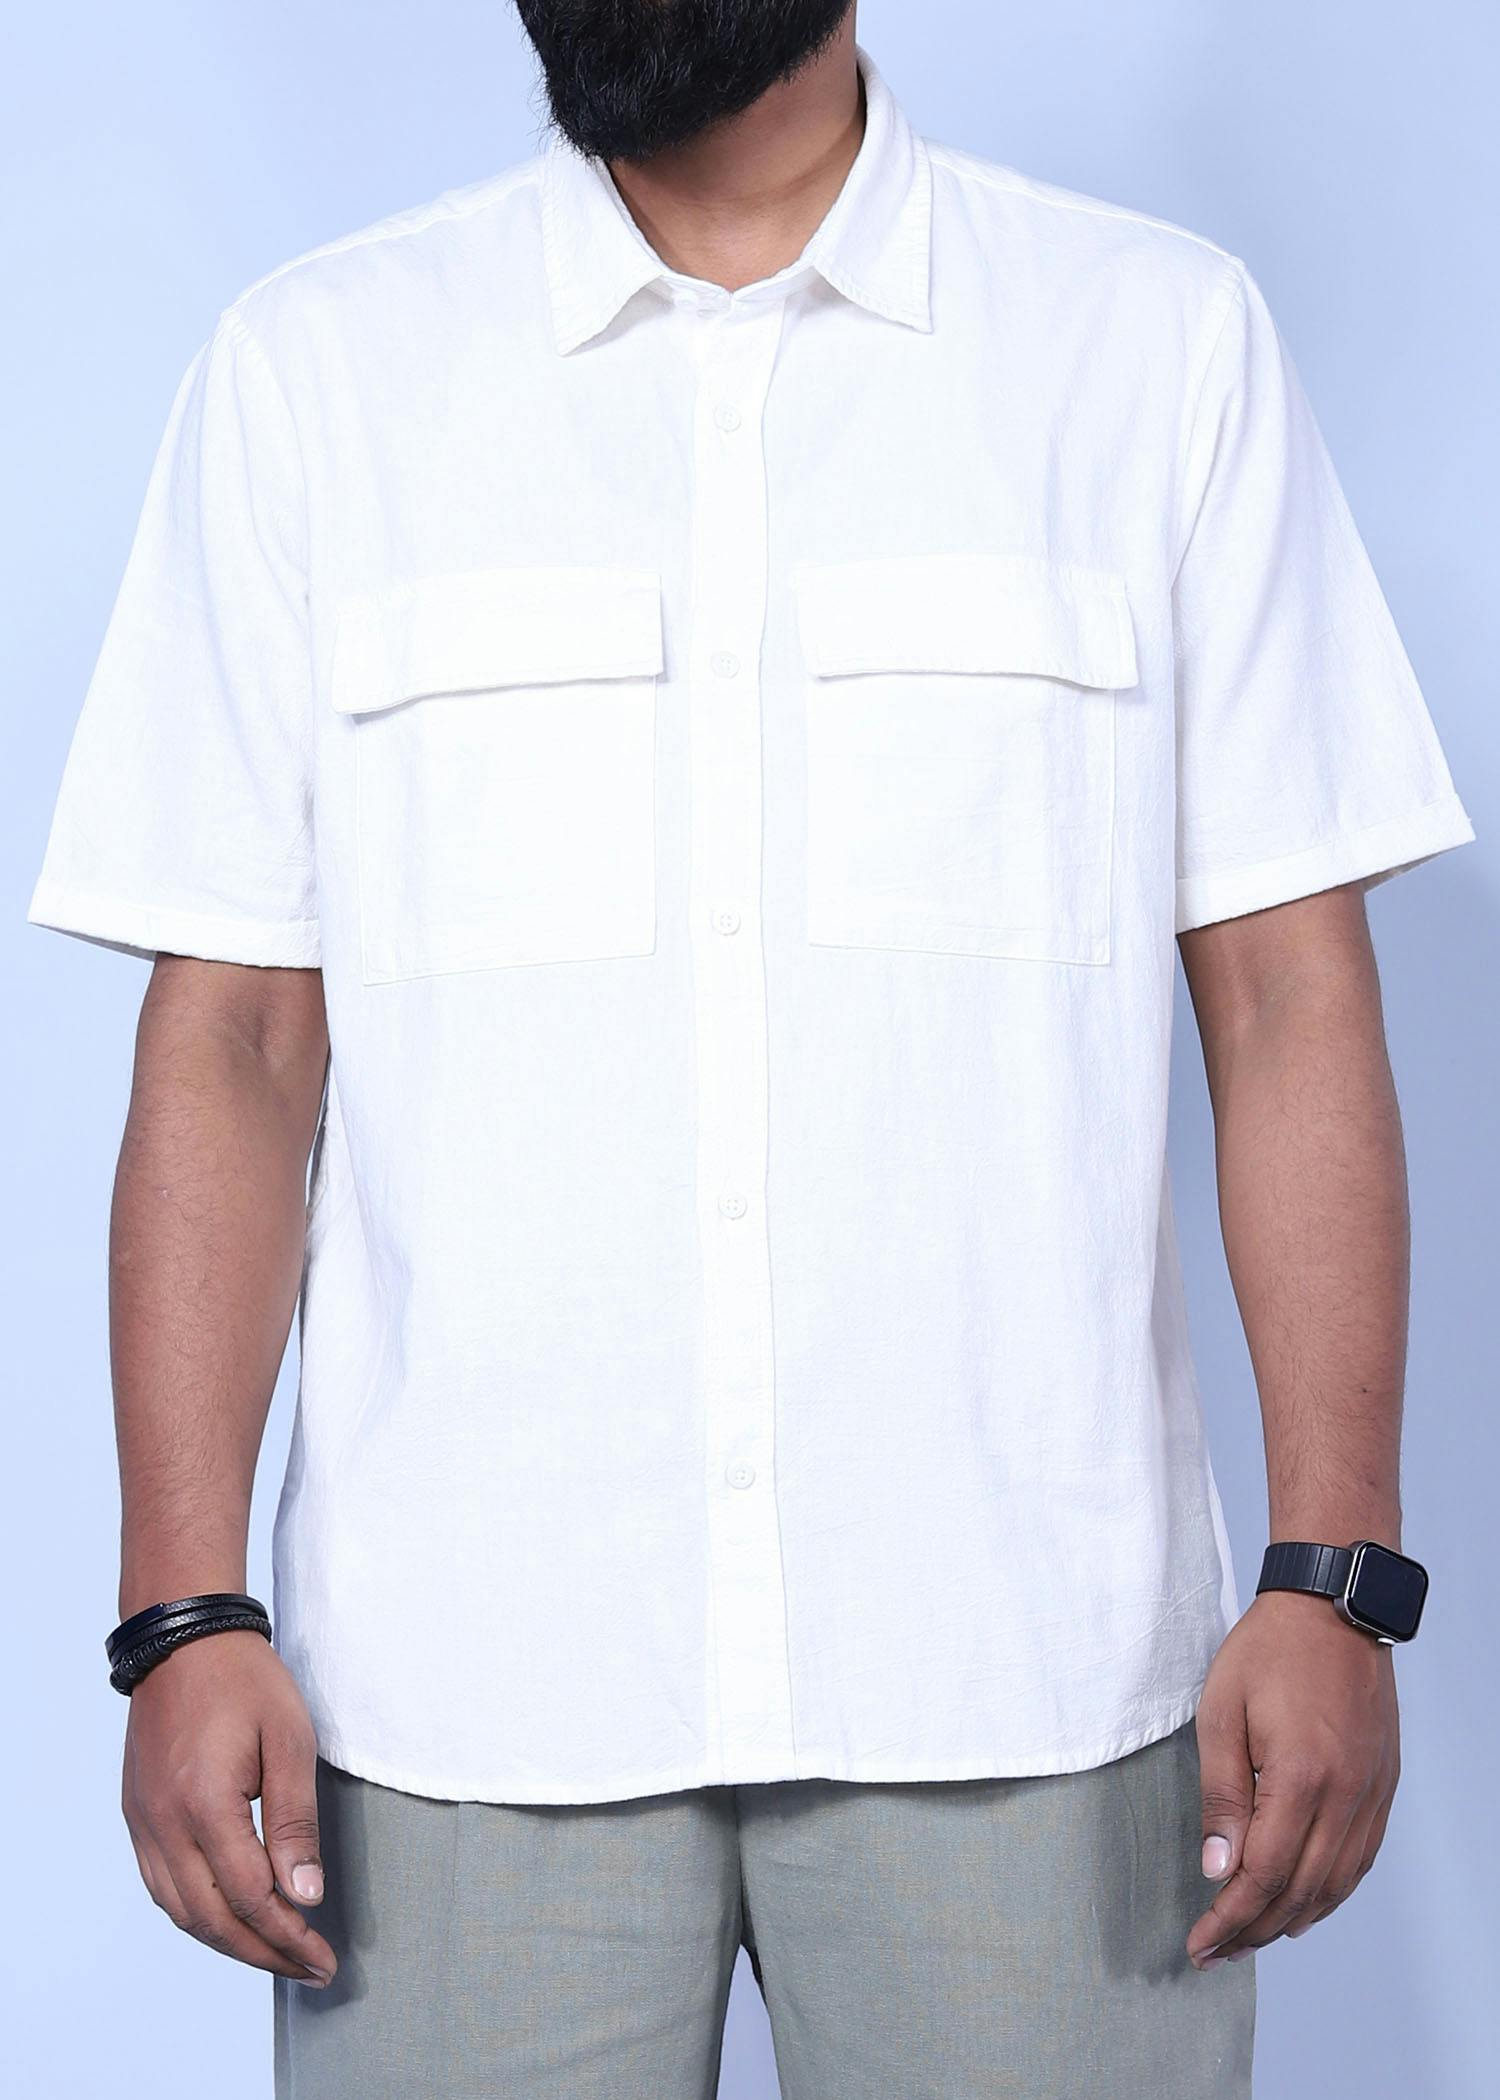 istanbul xxi hs shirt white color facecropped